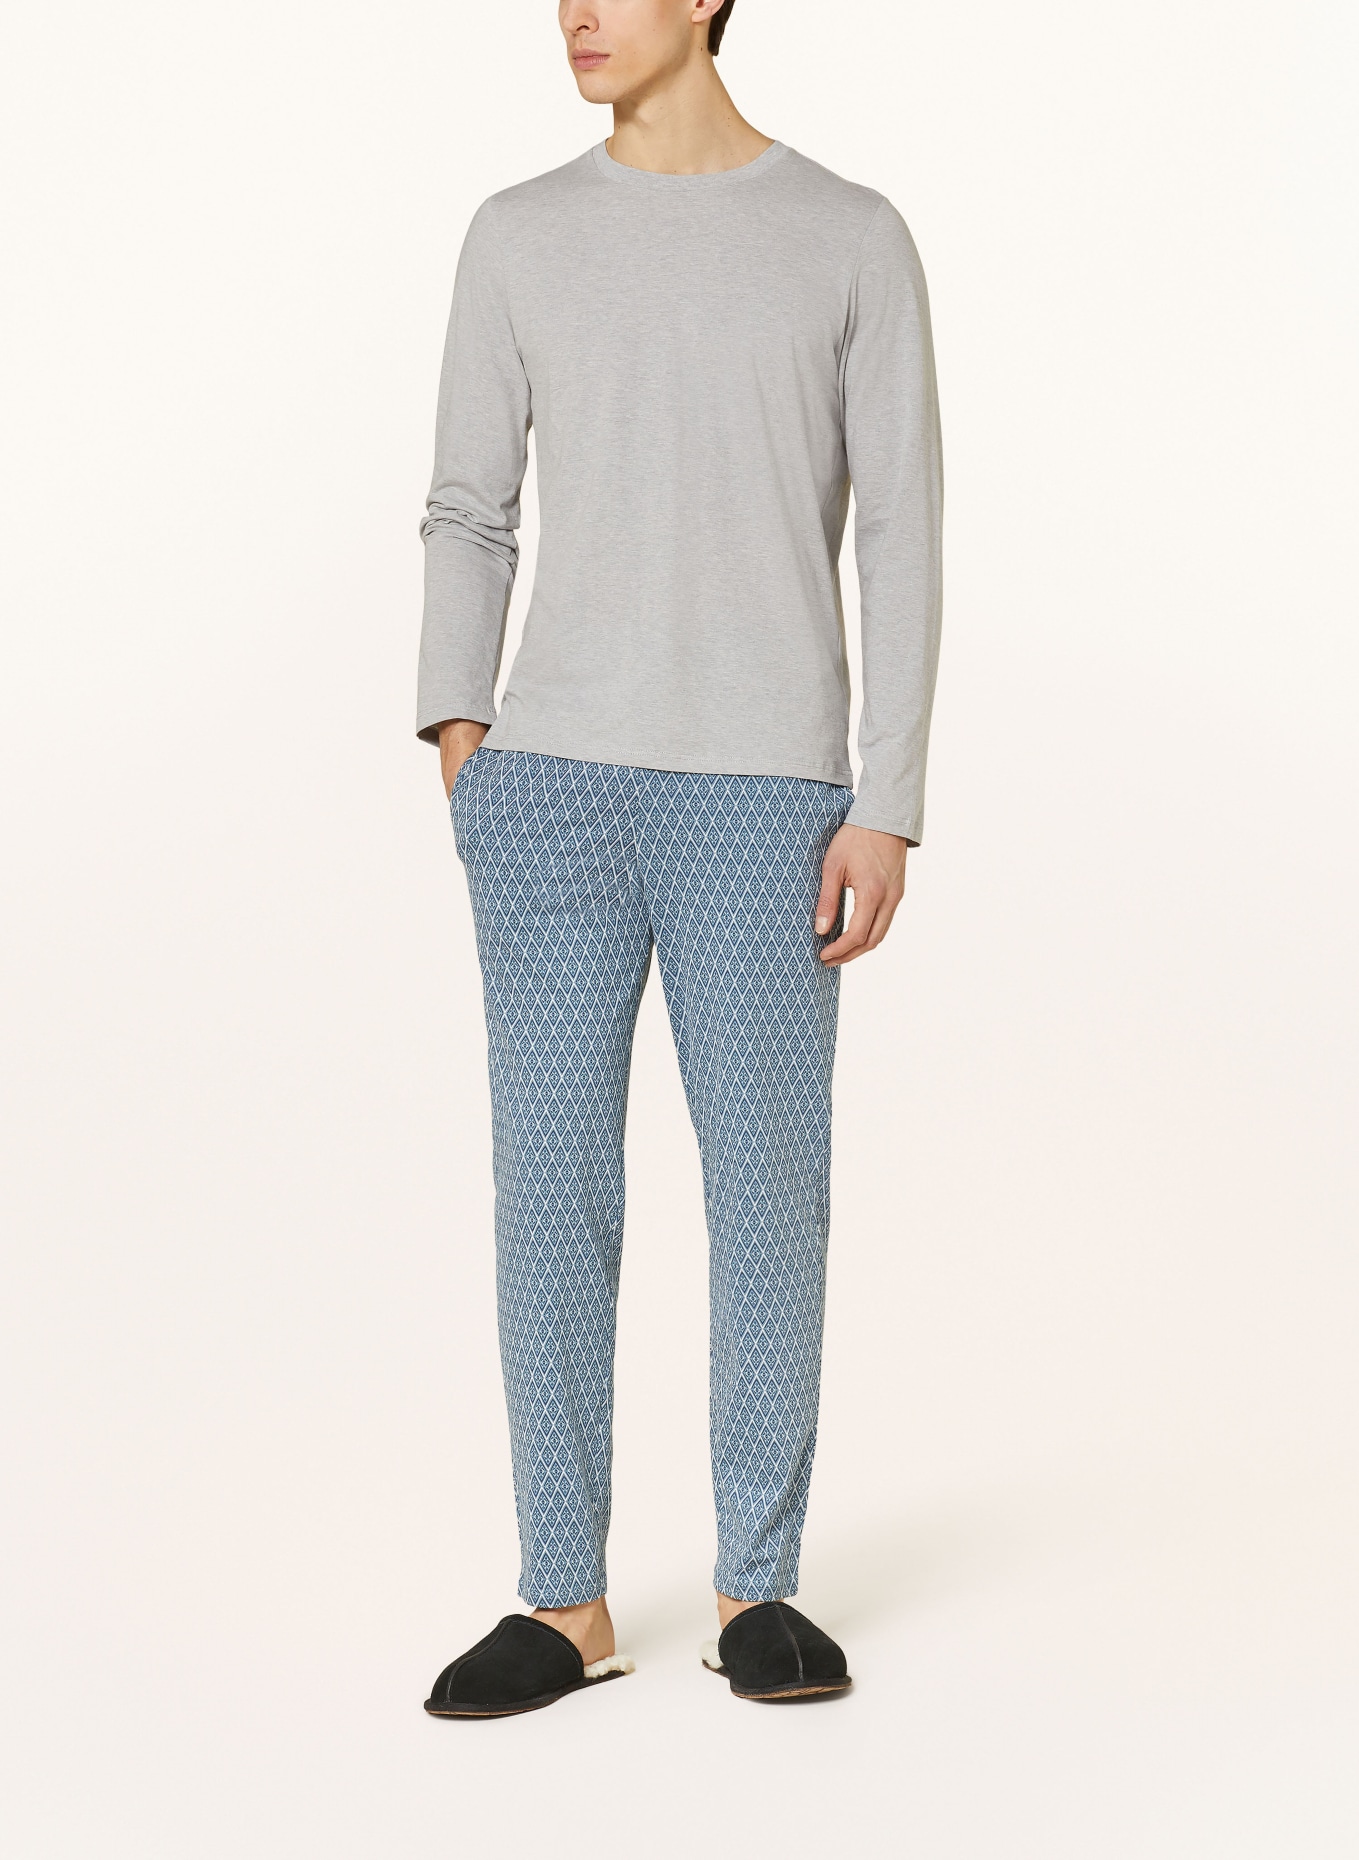 SCHIESSER Pajama pants MIX + RELAX, Color: BLUE GRAY/ BLUE/ WHITE (Image 2)